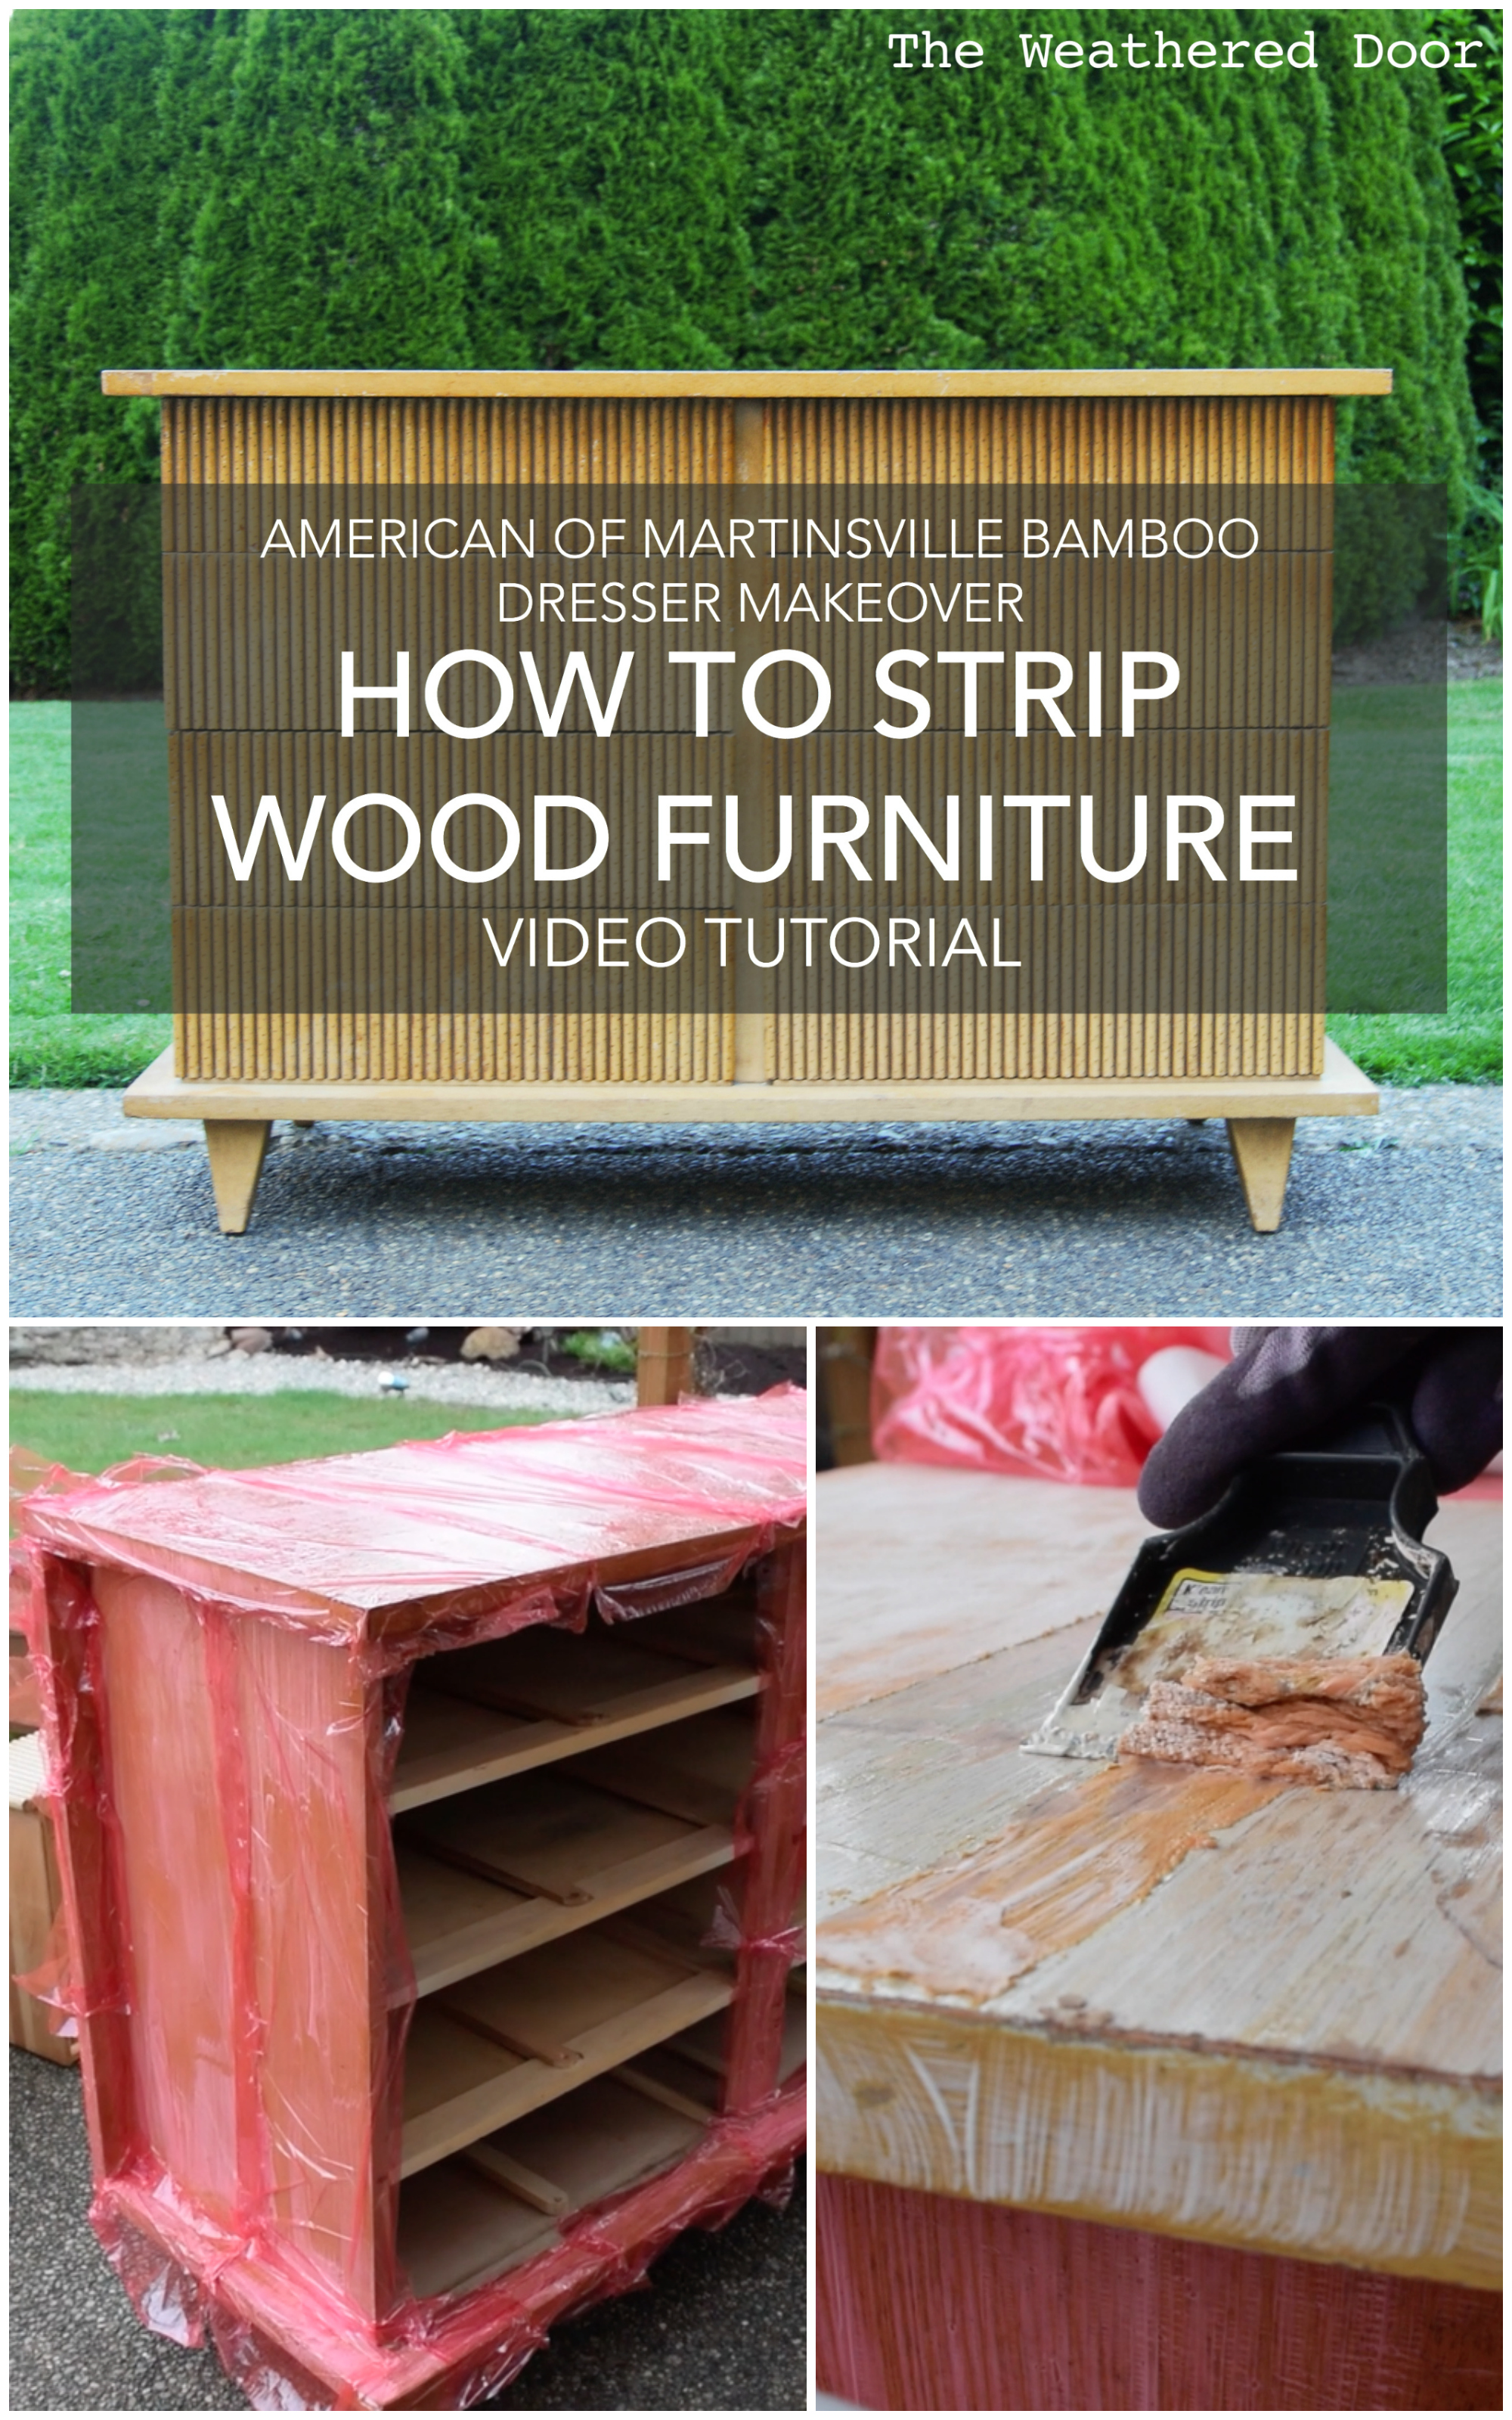 How To Strip Painted Or Stained Wood Furniture Diy Video Tutorial